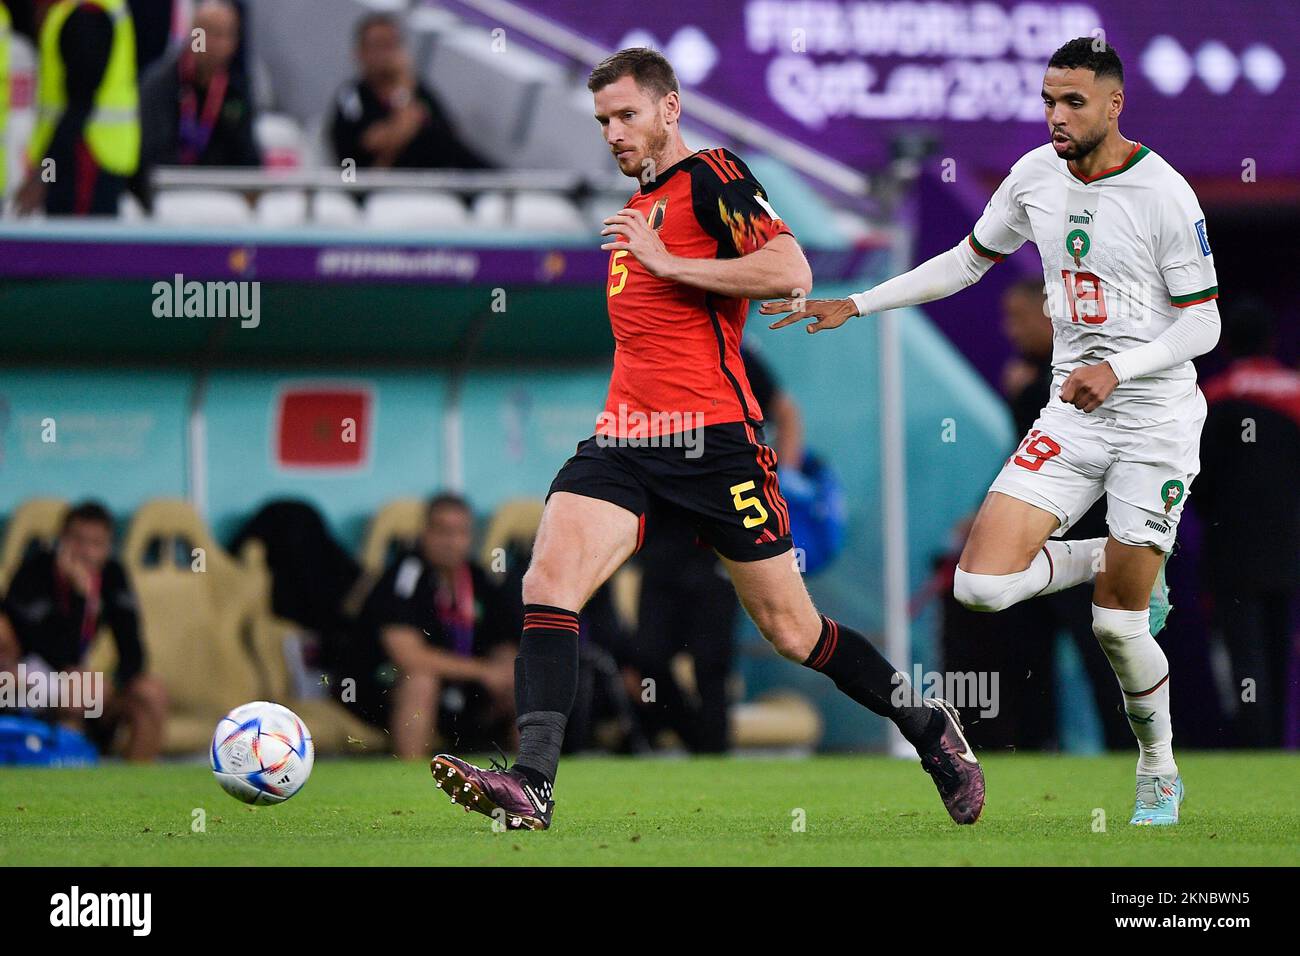 DOHA, QATAR - NOVEMBER 27: Jan Vertonghen of Belgium battles for the ball with Youssef En Nesyri of Morocco during the Group F - FIFA World Cup Qatar 2022 match between Belgium and Morocco at the Al Thumama Stadium on November 27, 2022 in Doha, Qatar (Photo by Pablo Morano/BSR Agency) Stock Photo